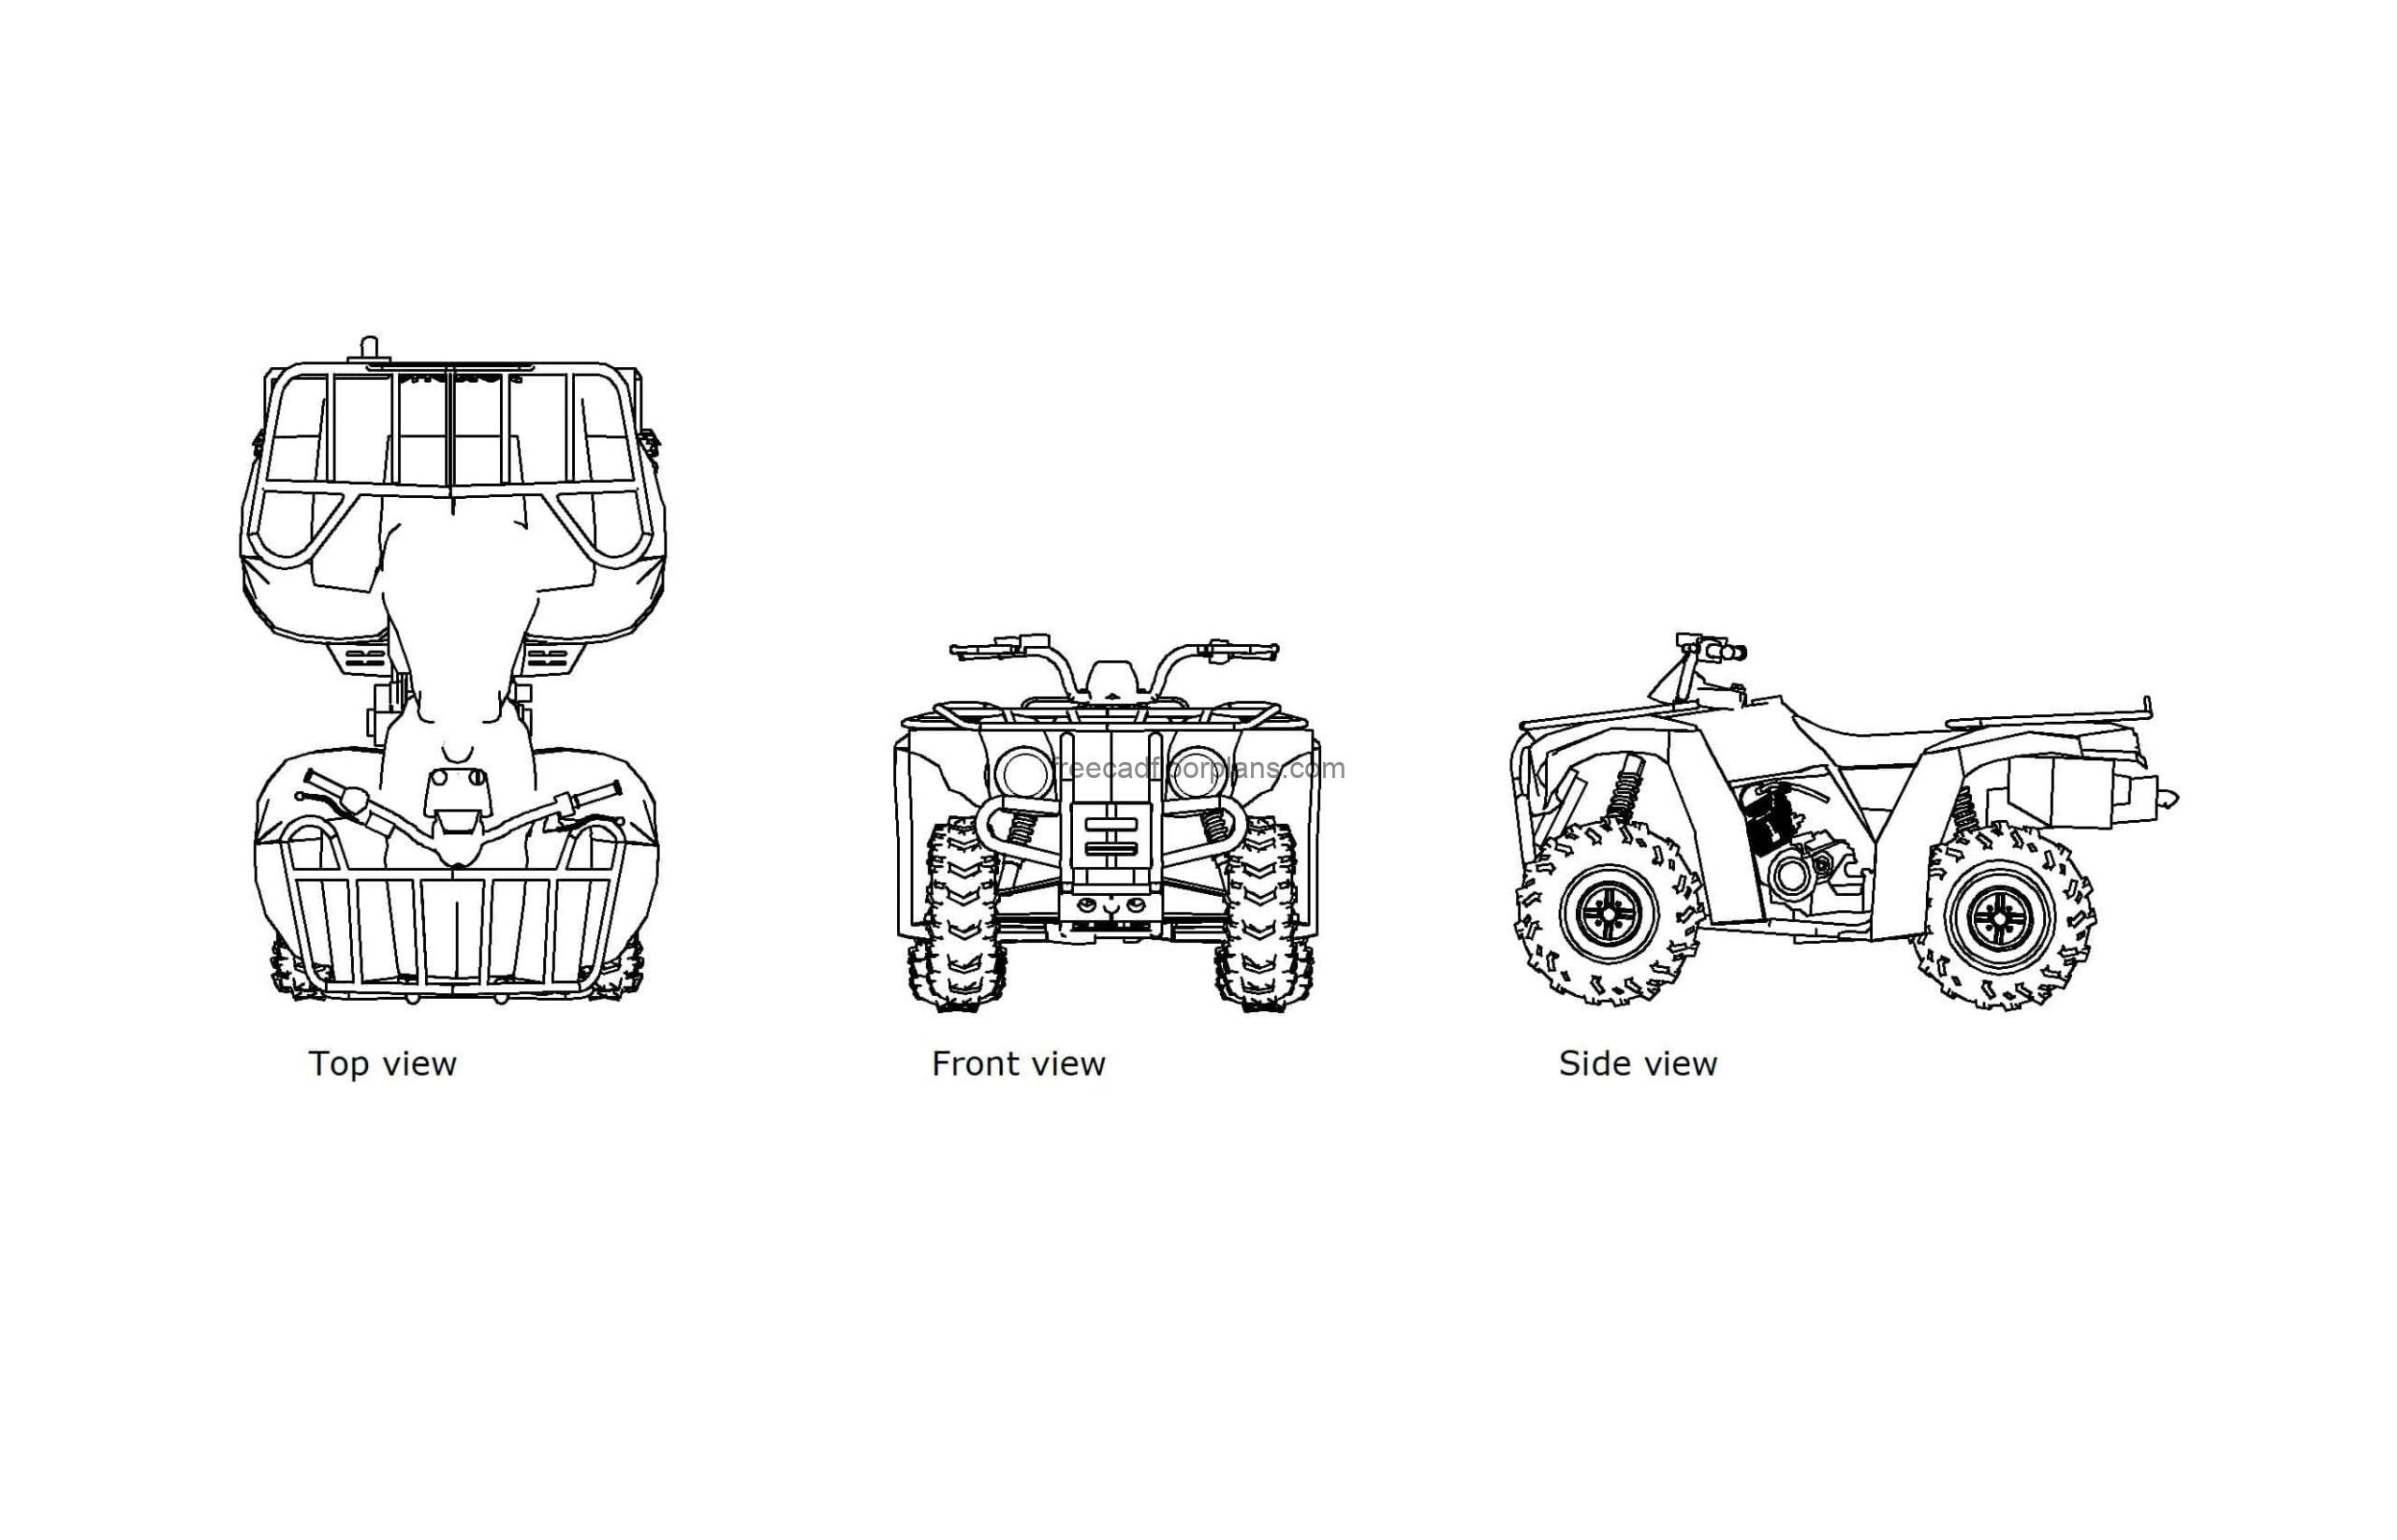 autocad drawing of a four wheeler, plan and elevation 2d views, dwg file free for download